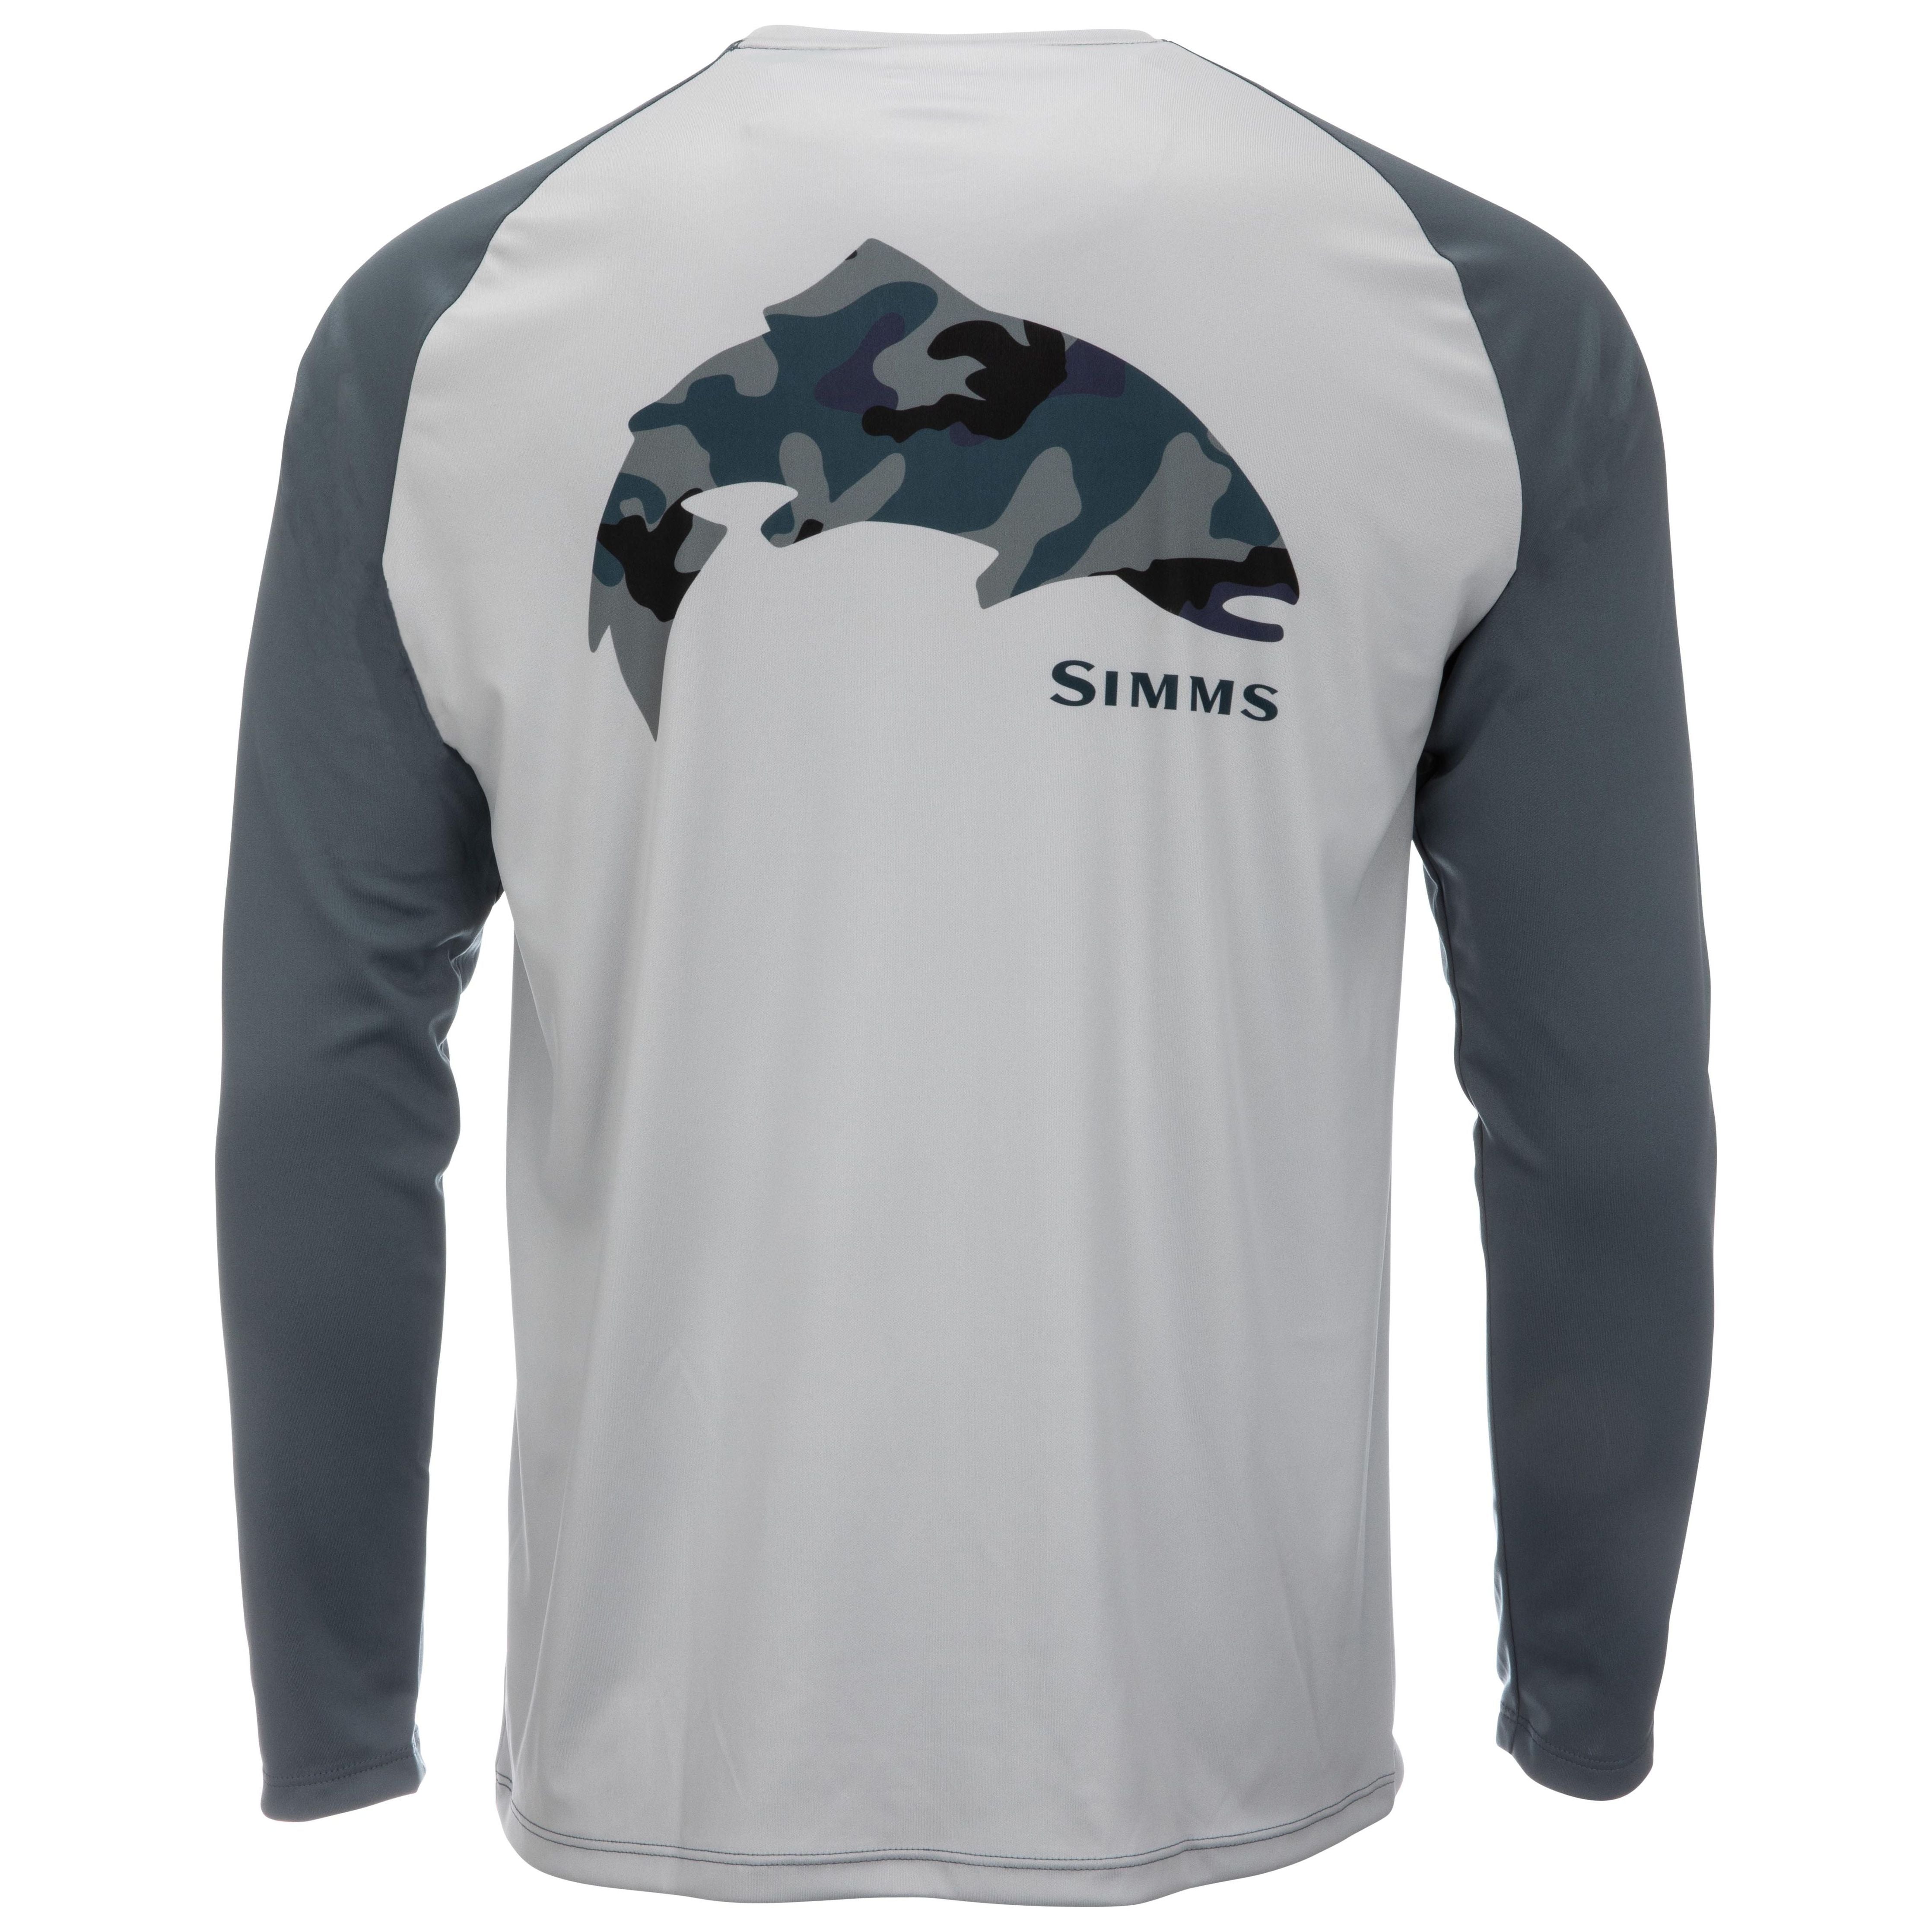 Simms Tech Tee - Artist Series Trout / Sterling / Storm Image 01